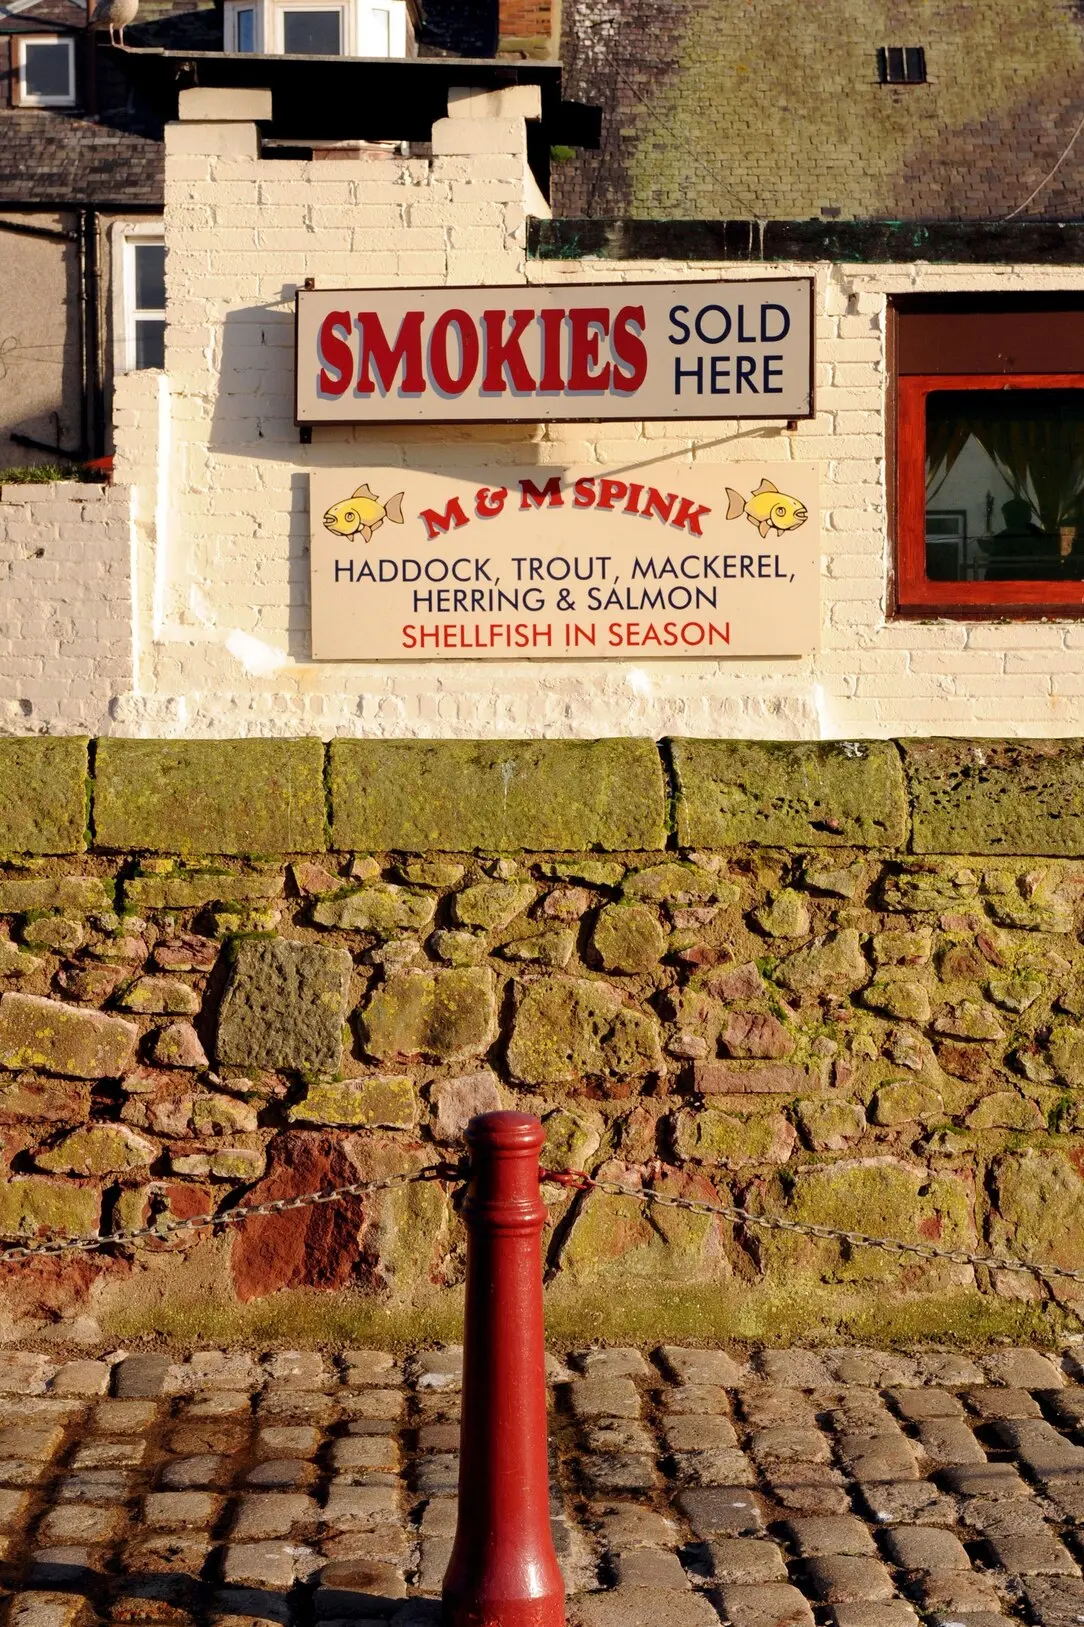 arbroath smokehouse - What is Arbroath famous for